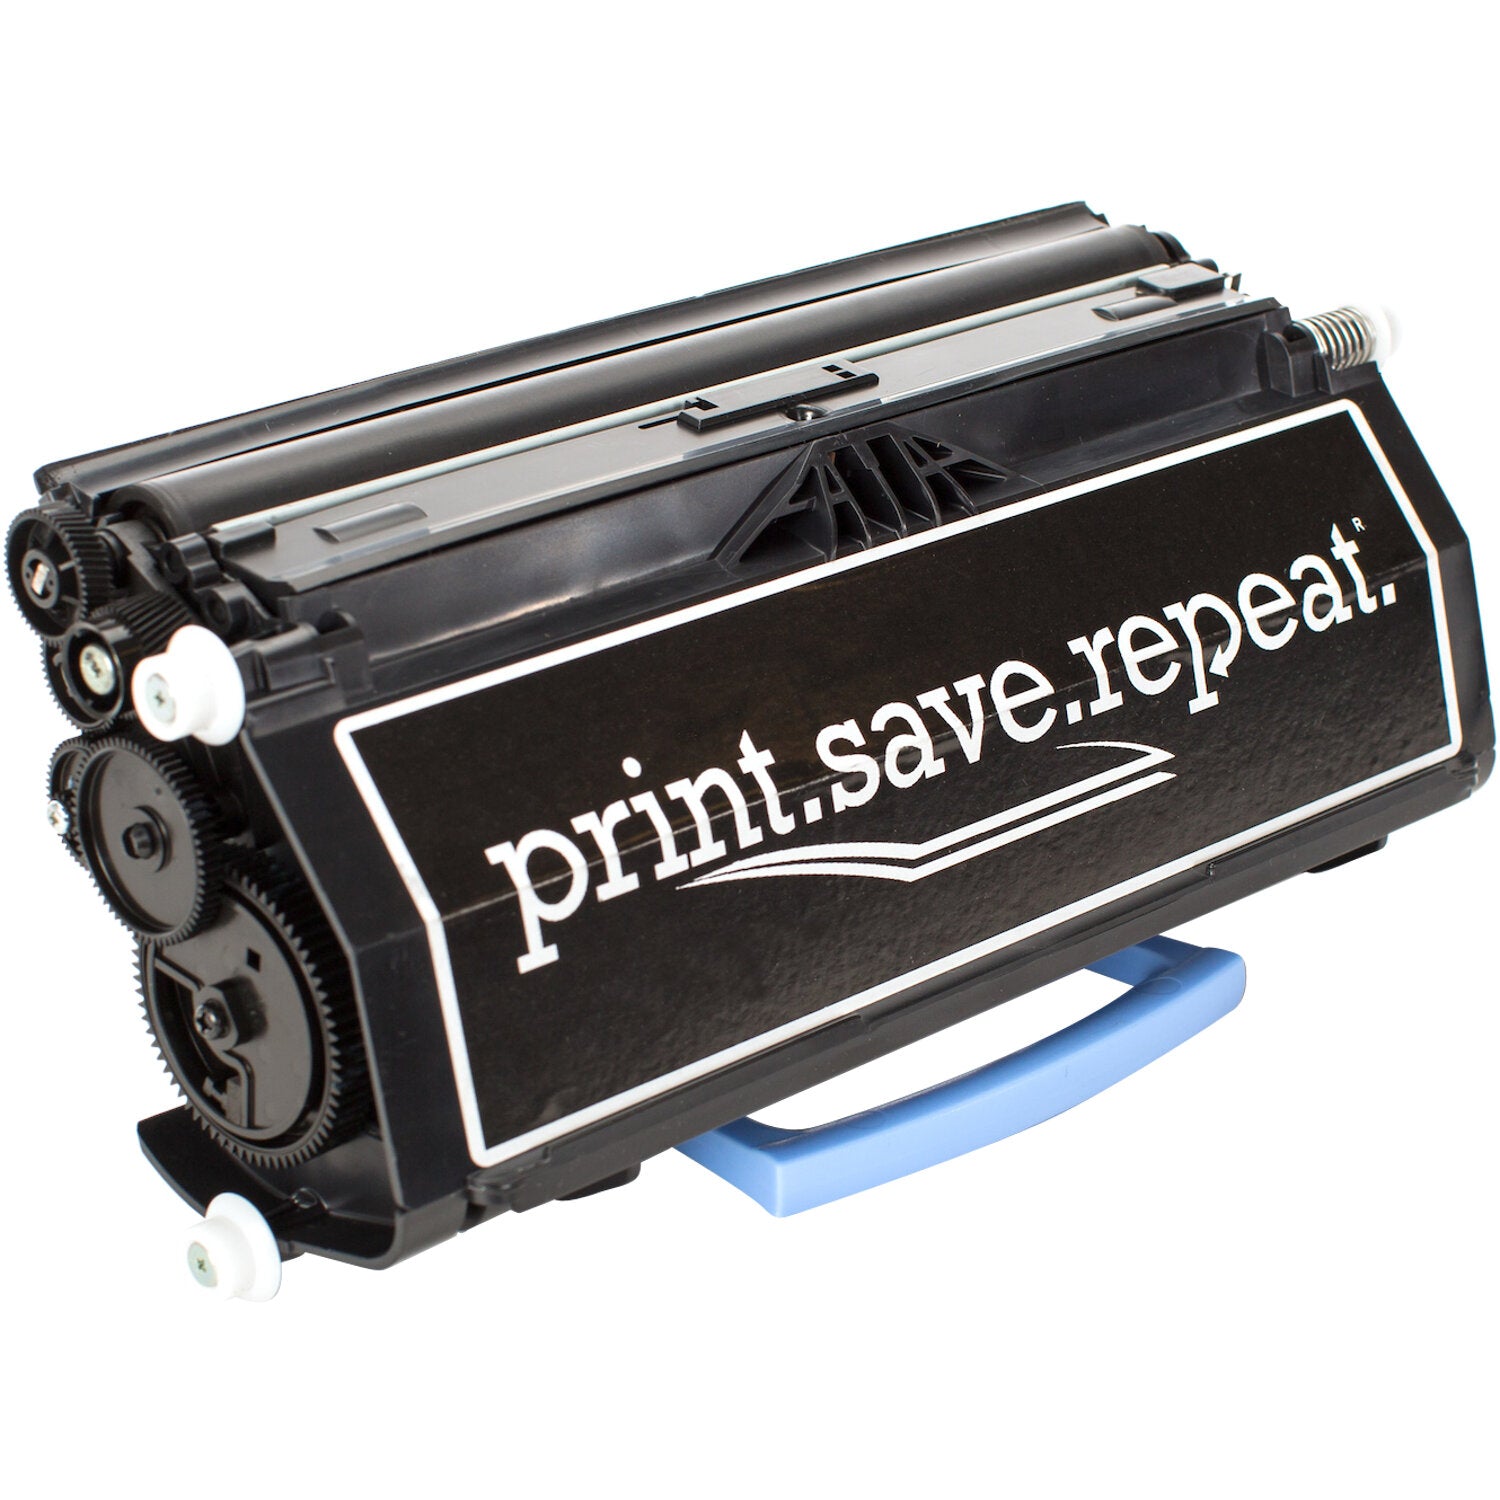 Print.Save.Repeat. Lexmark X463X21G Extra High Yield Remanufactured Toner Cartridge for X463, X464, X466 [15,000 Pages]